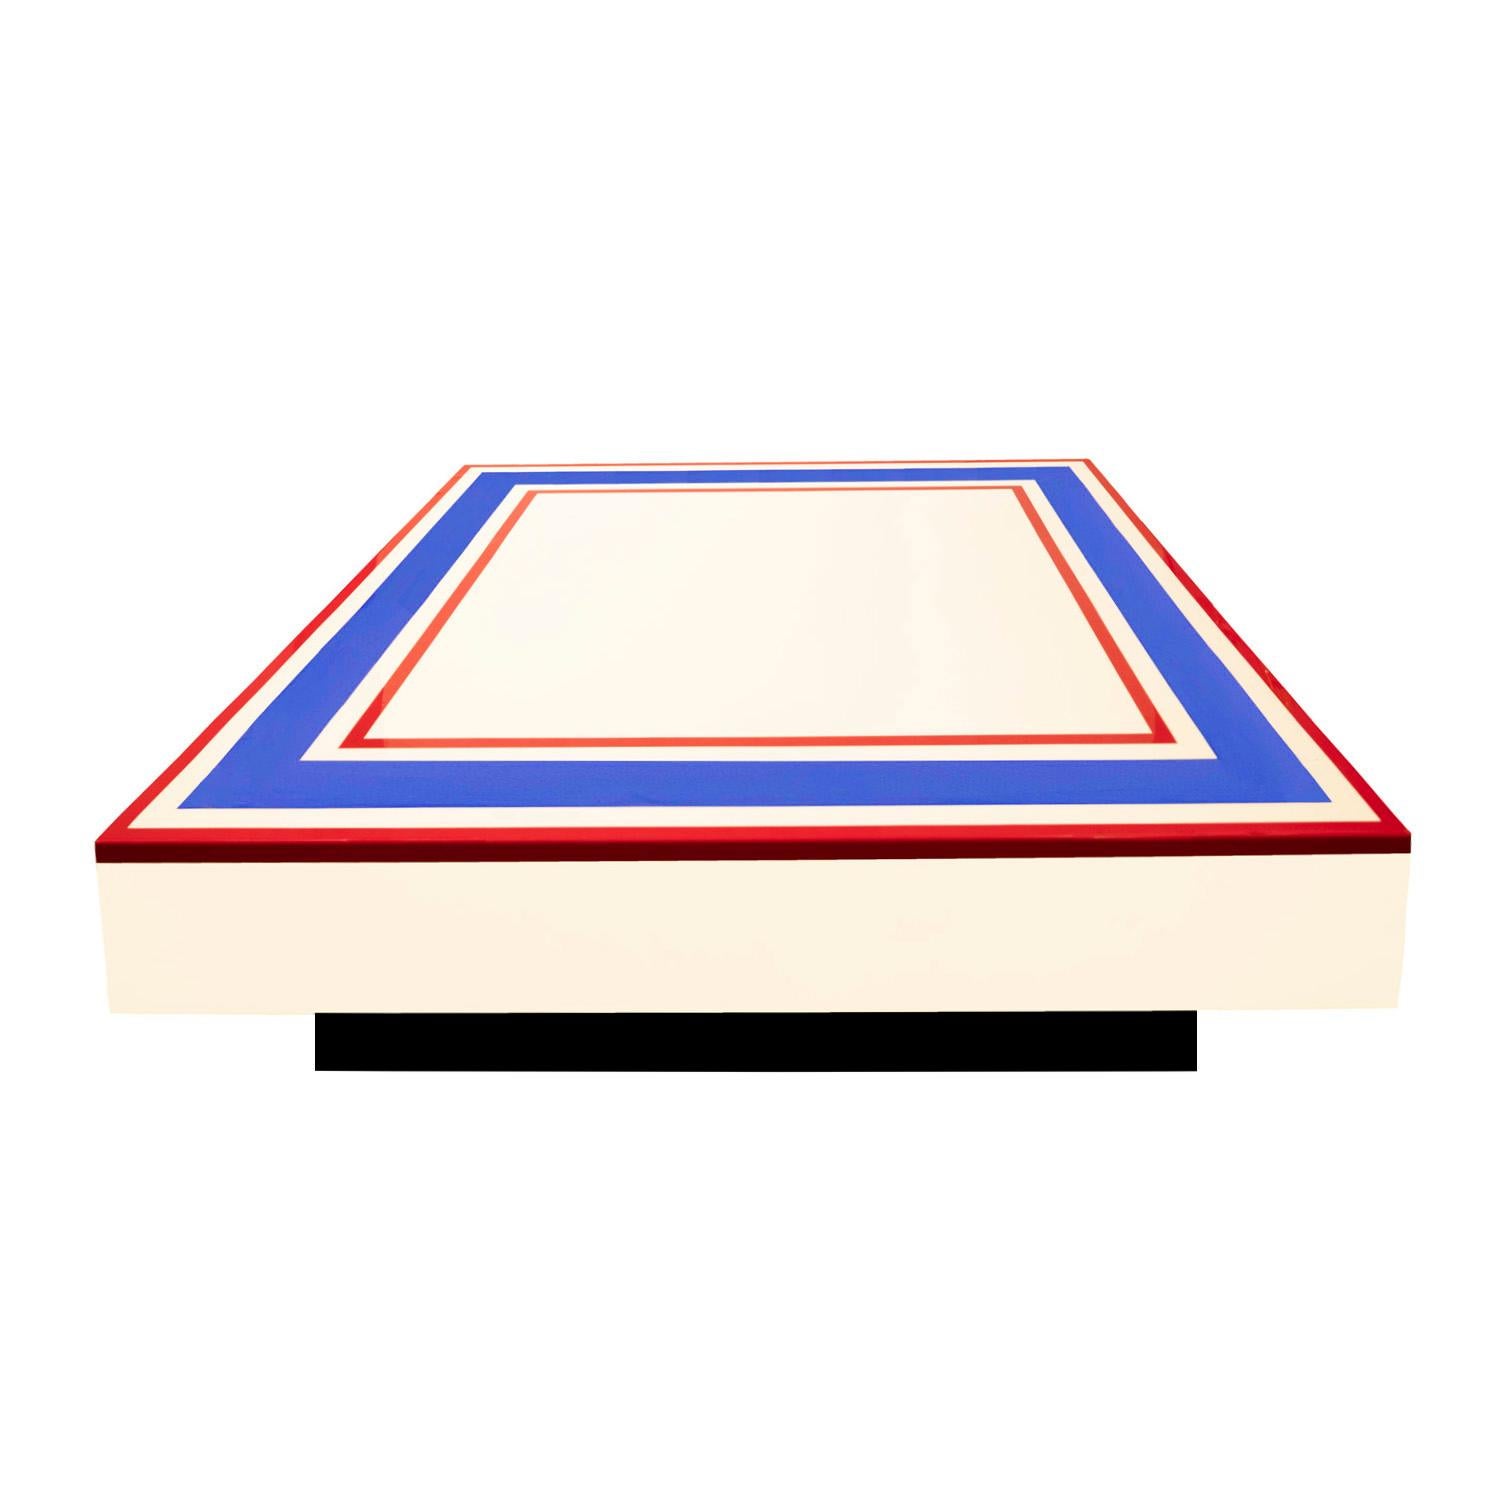 Stunning lacquered coffee table in white lacquer with graphic concentric red and blue lacquer elements by Willy Rizzo, Italian 1970's (signed on side 